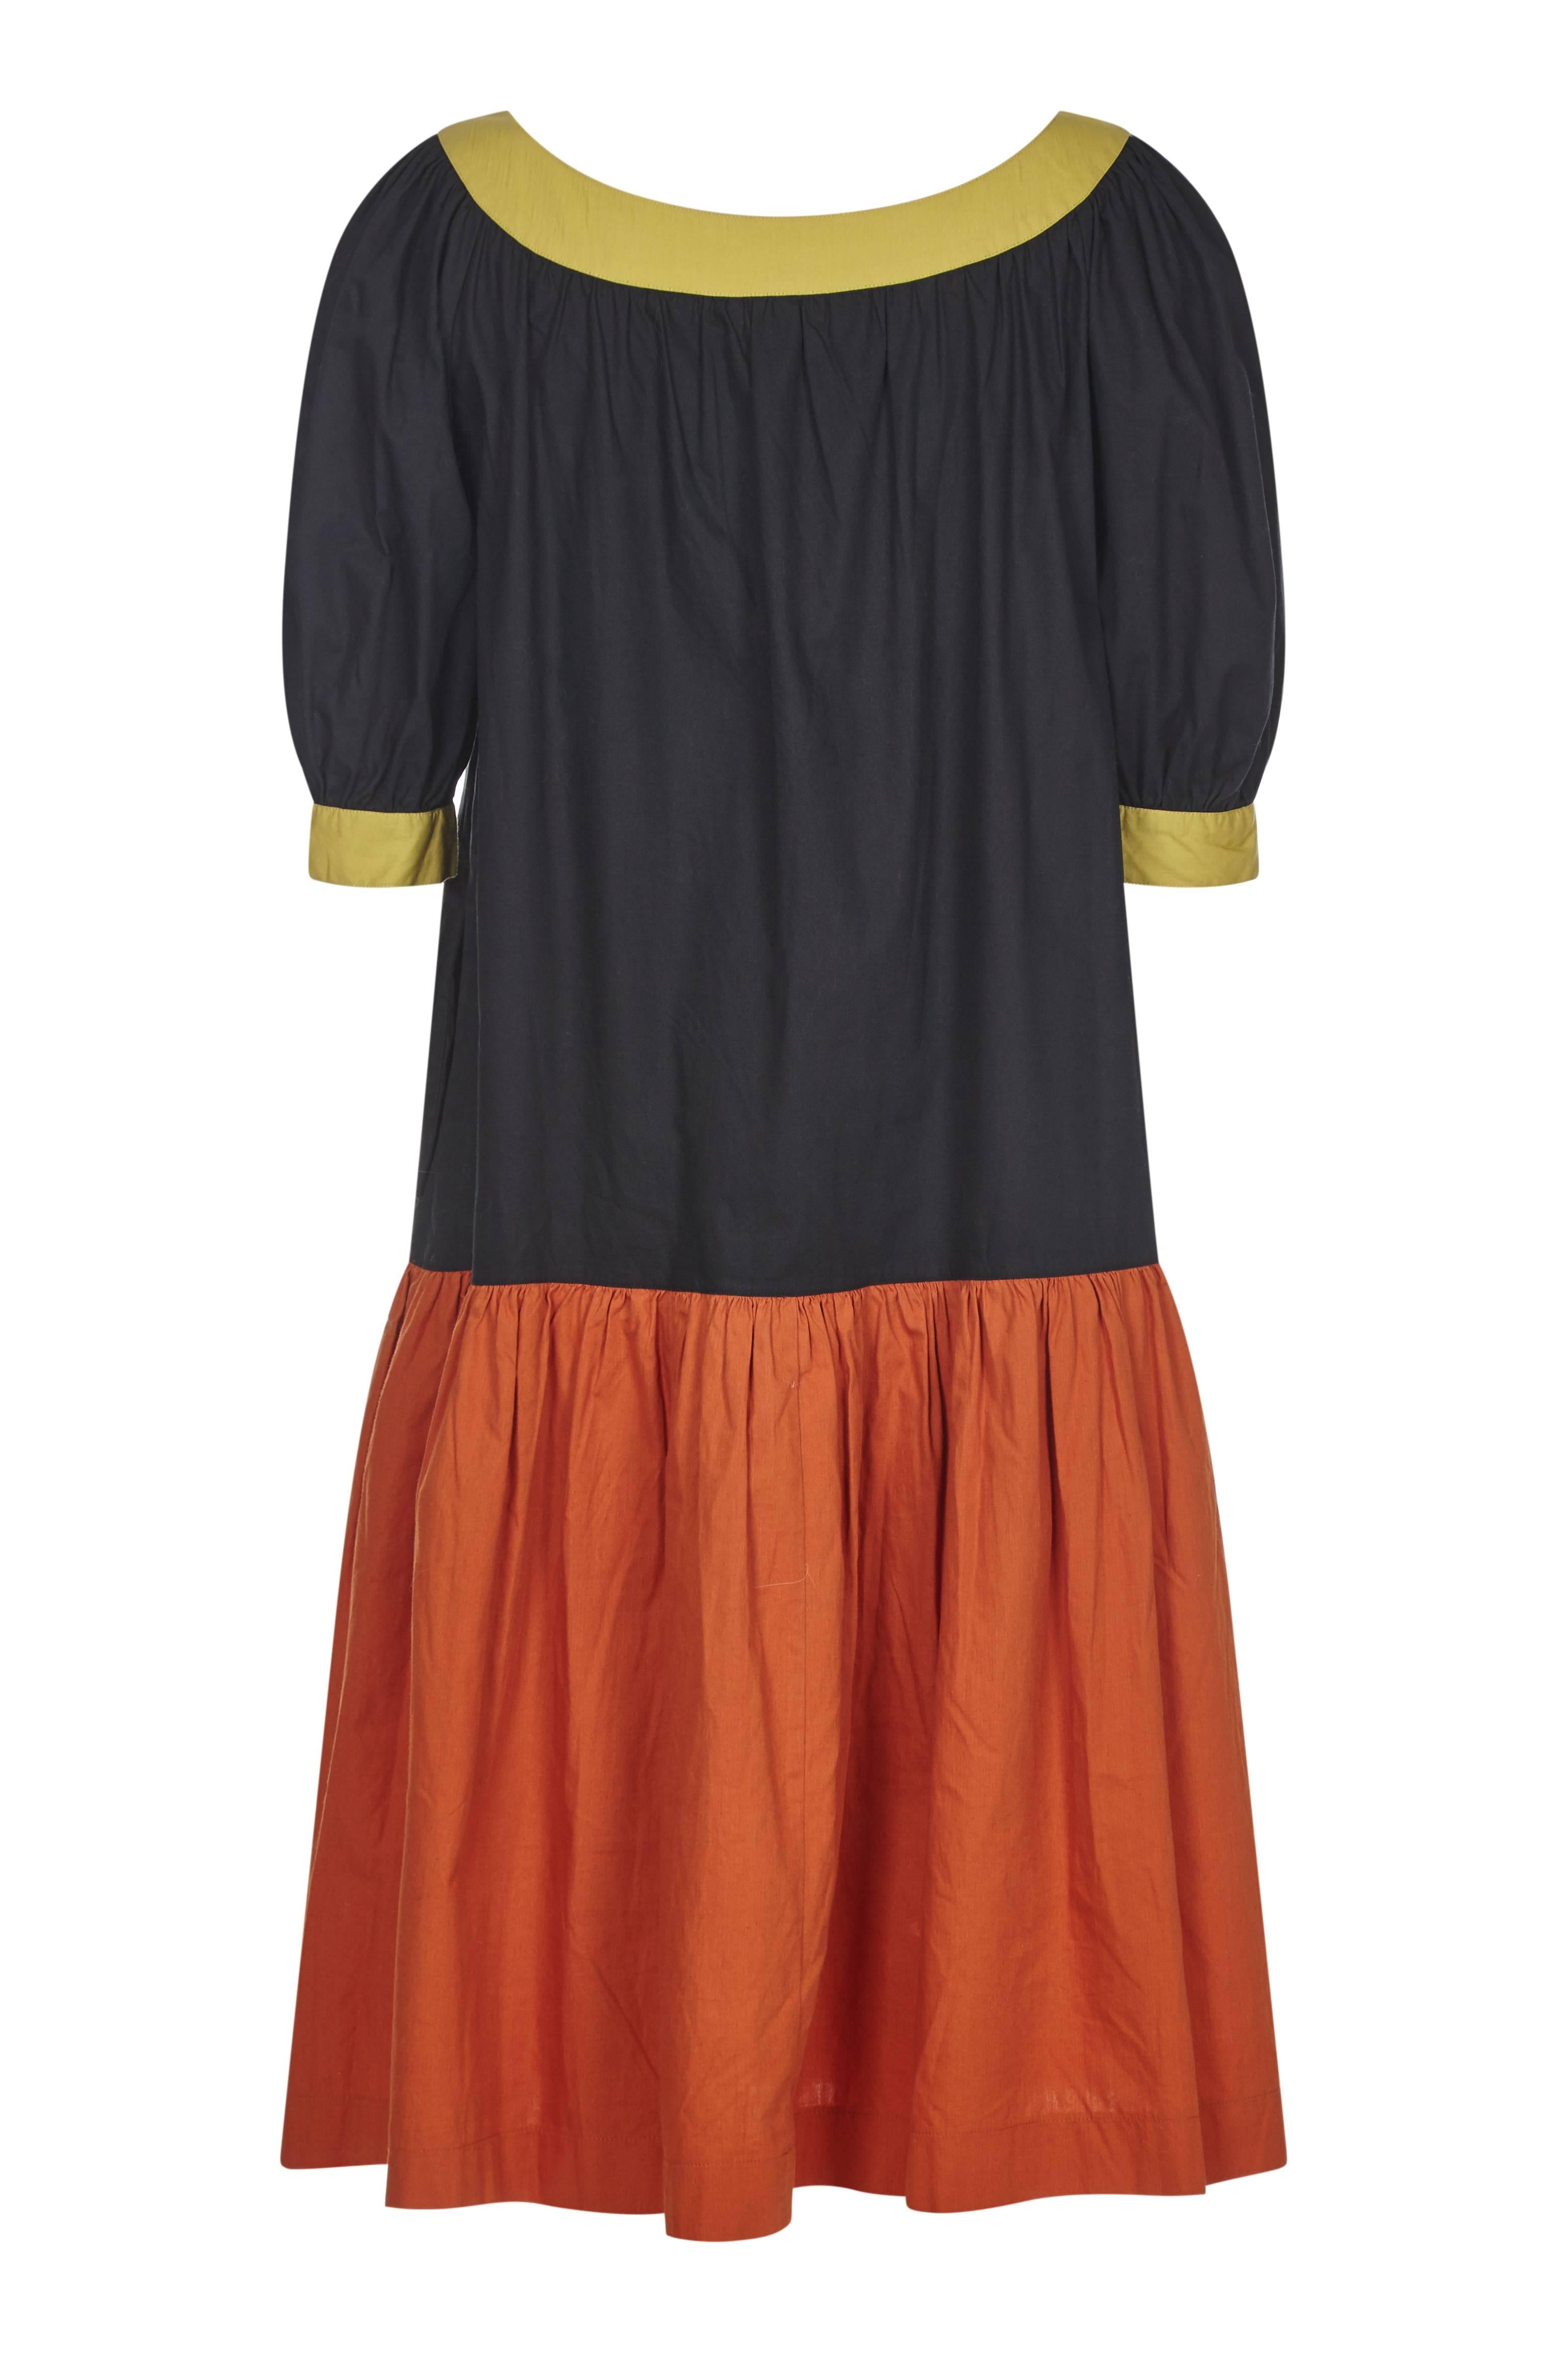 Charming Yves Saint Laurent Variation 1980s cotton peasant dress with dropped waist and billowed sleeves. The dress is 100% crisp cotton fabric in block colours ochre, warm rust and black, with a gentle scoop neck and voluminous selves that are